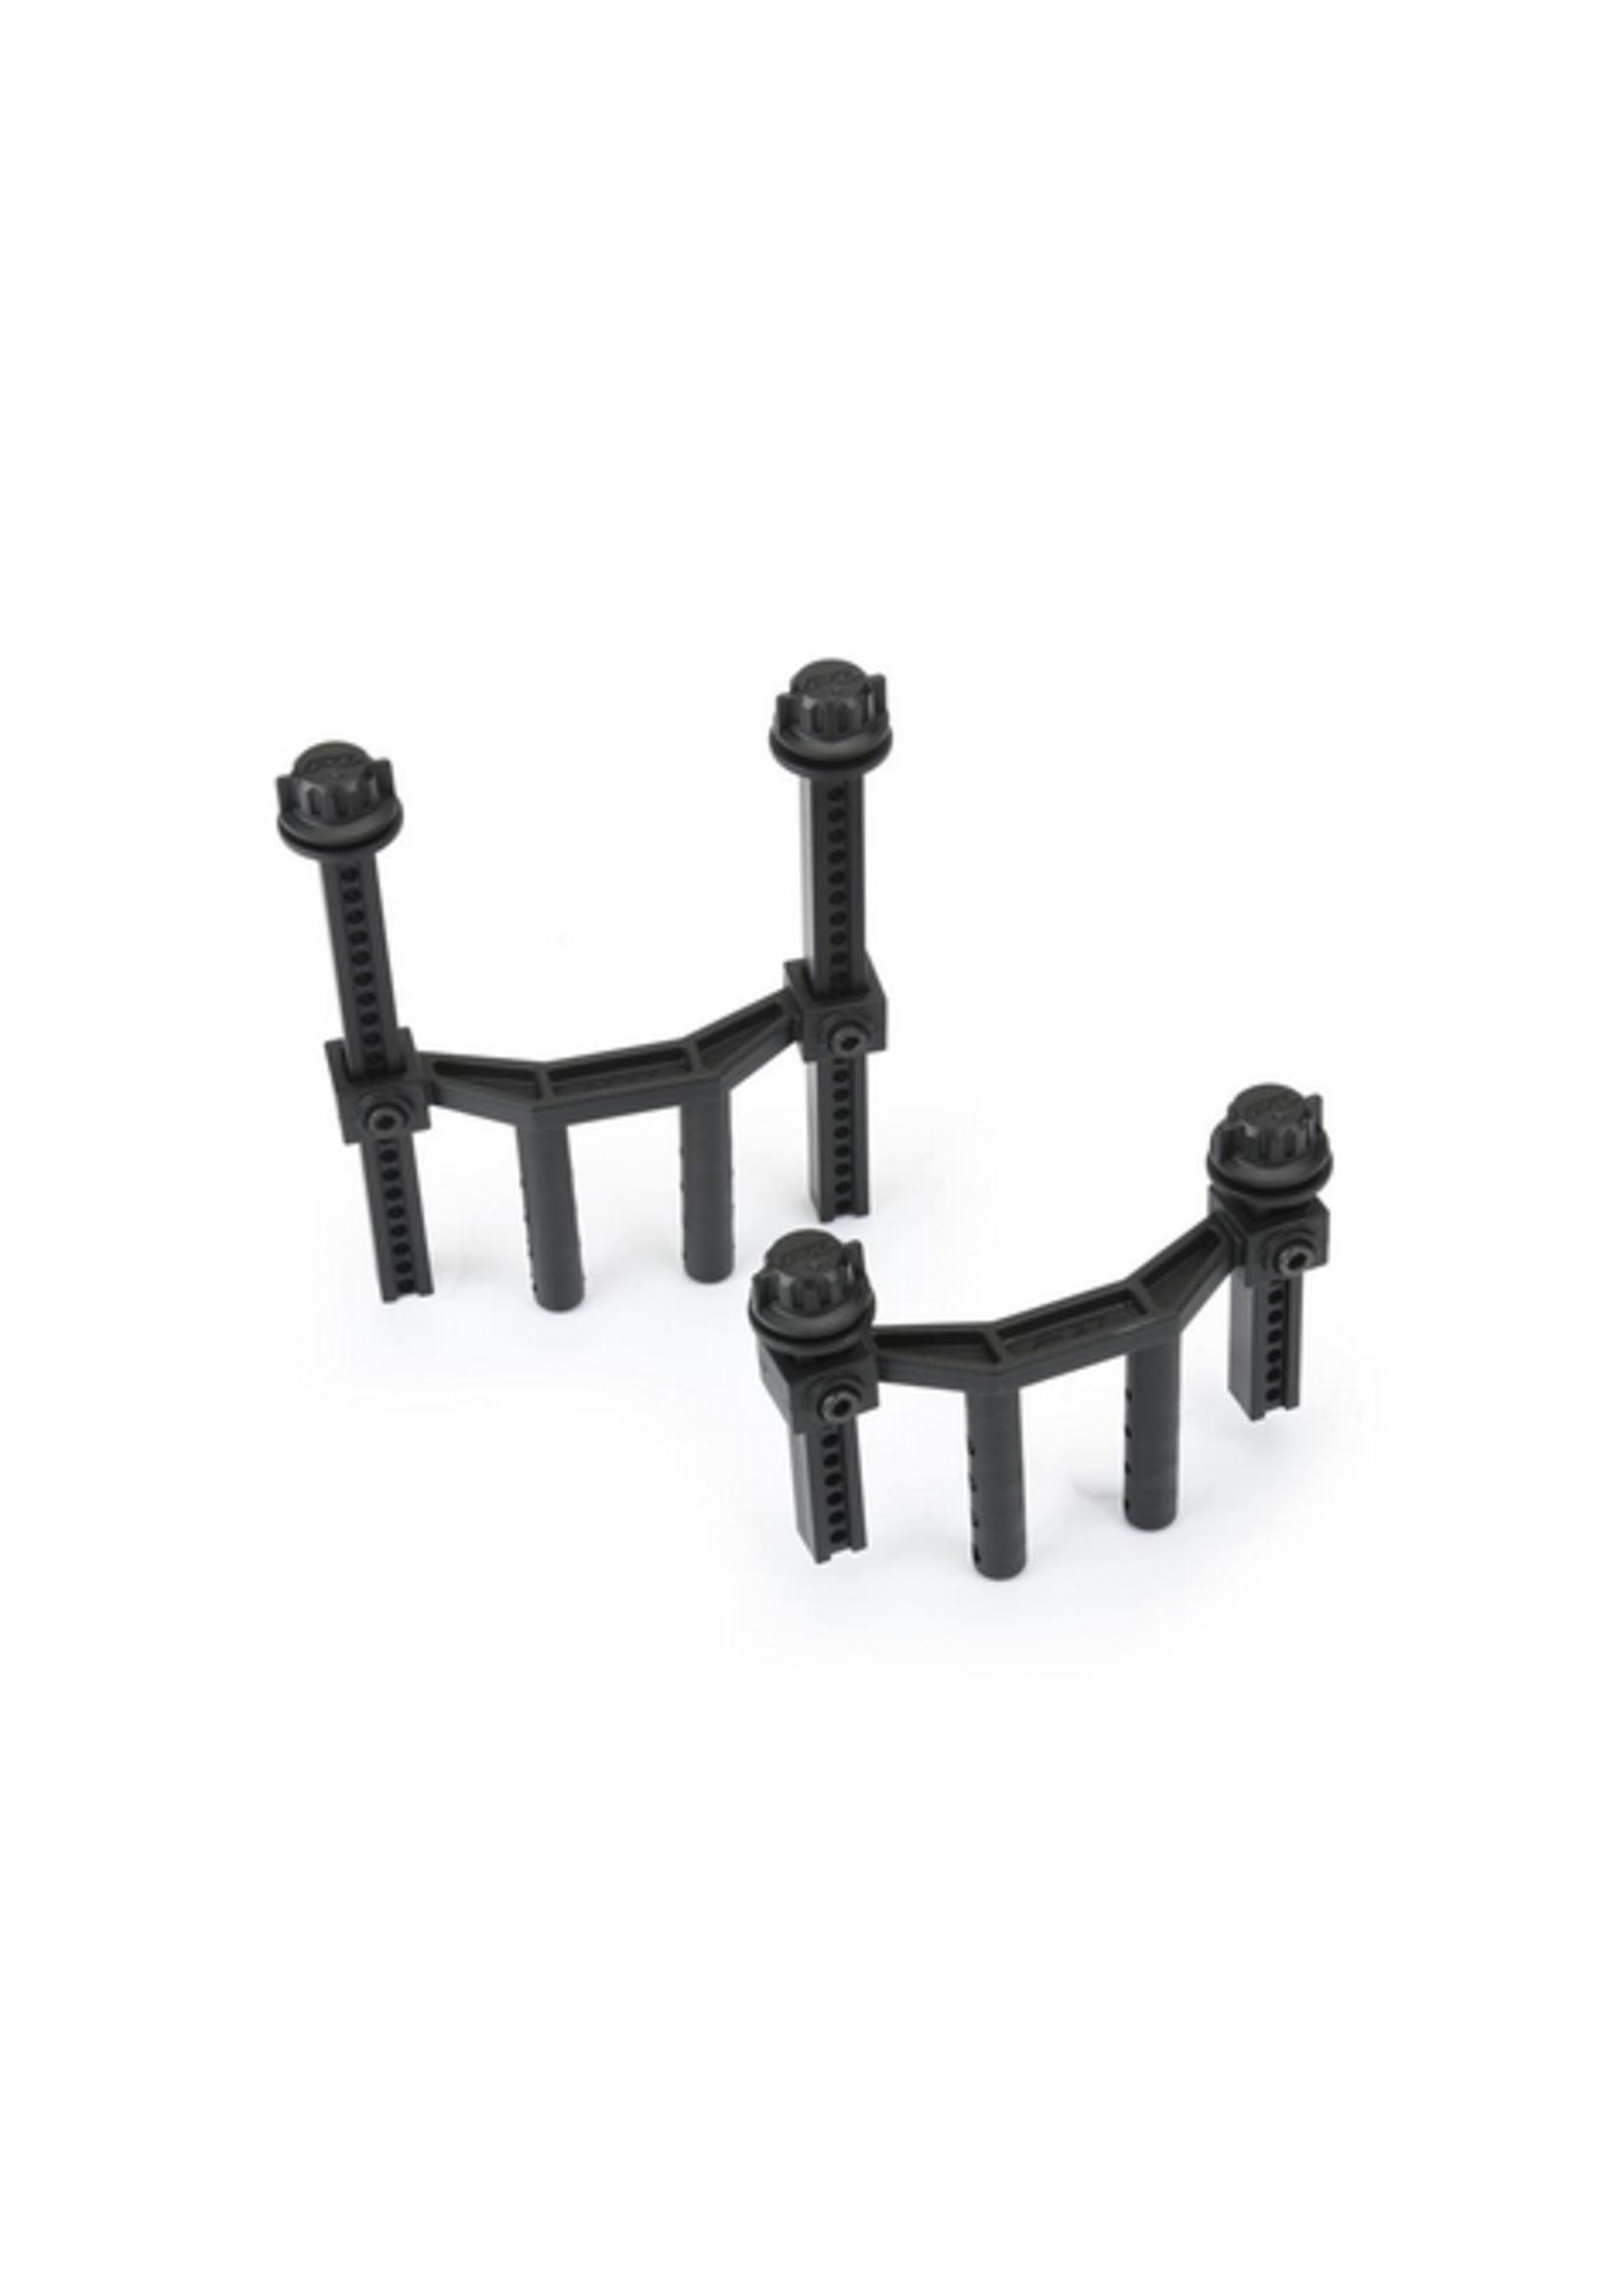 Pro-Line Racing PRO6375-00 Pro-Line 1/10 Extended Front/Rear Body Mounts: Granite 4x4 and Others